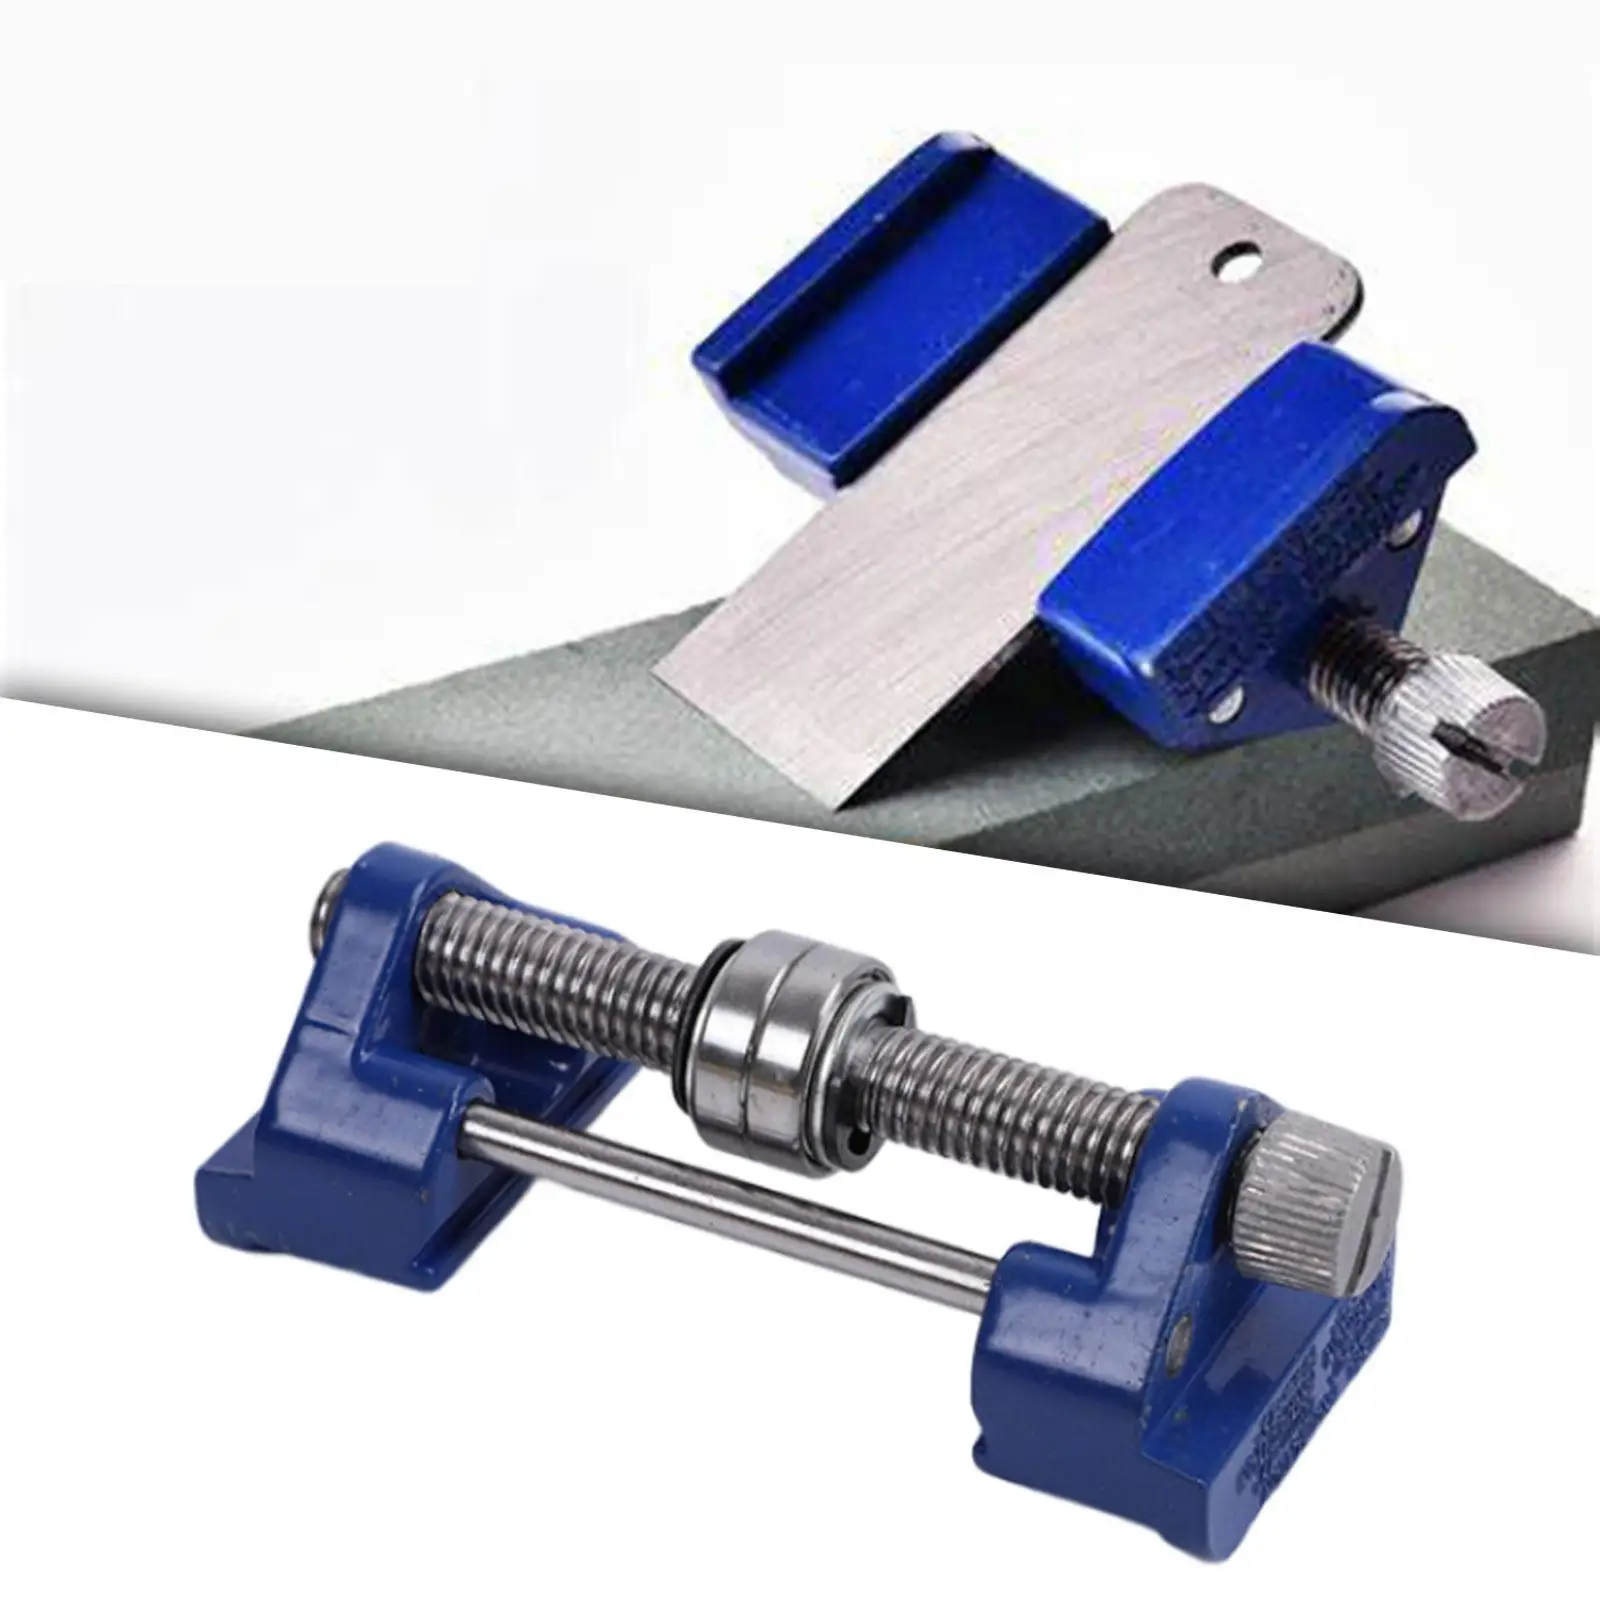 Honing Guide Adjustable Precision Roller Clamping Metal Rust Resistance Woodworking Sharpening Tool Iron Edge Sharpening